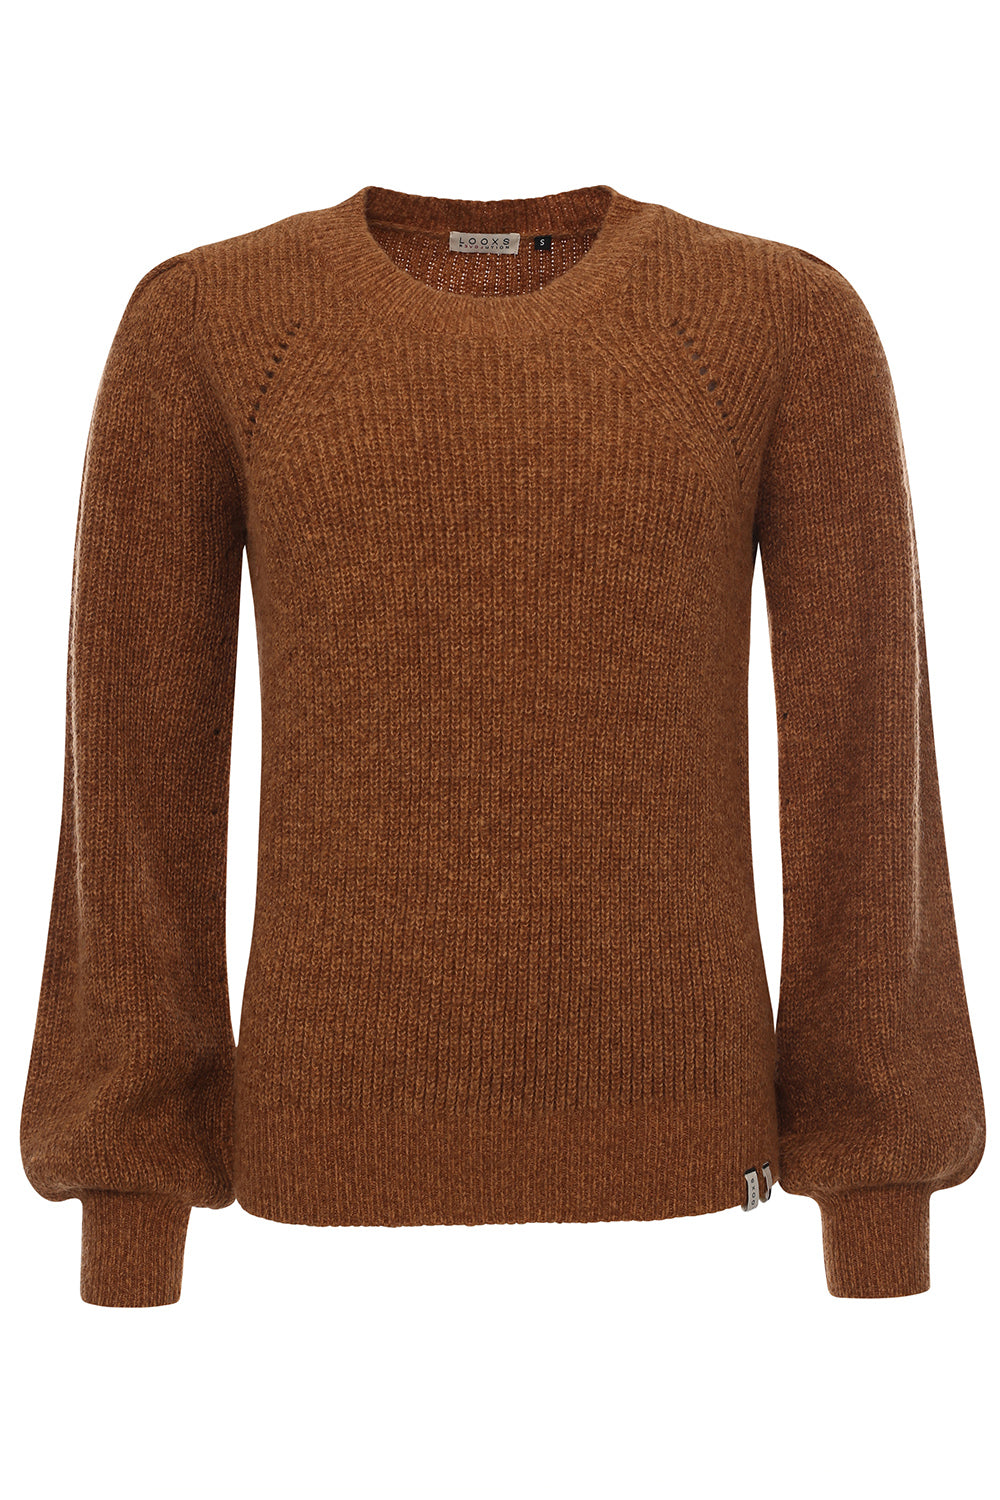 Looxs Ladies Knitted Pullover